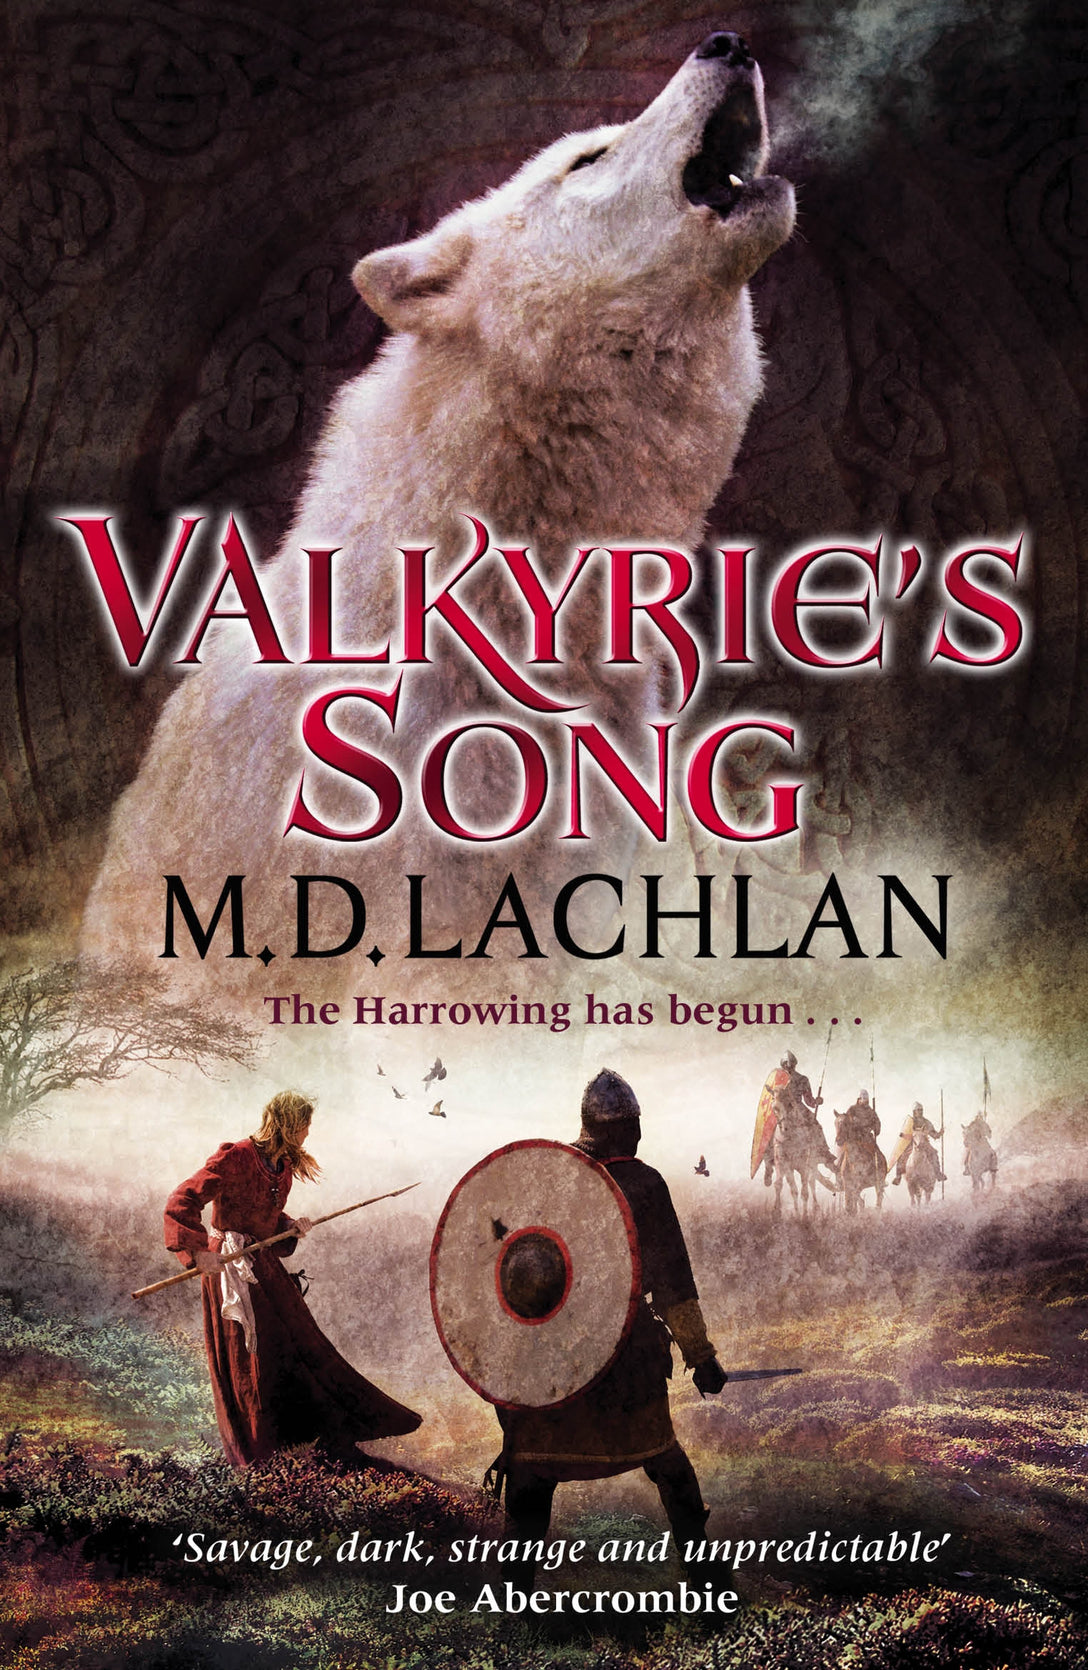 Valkyrie's Song by M.D. Lachlan